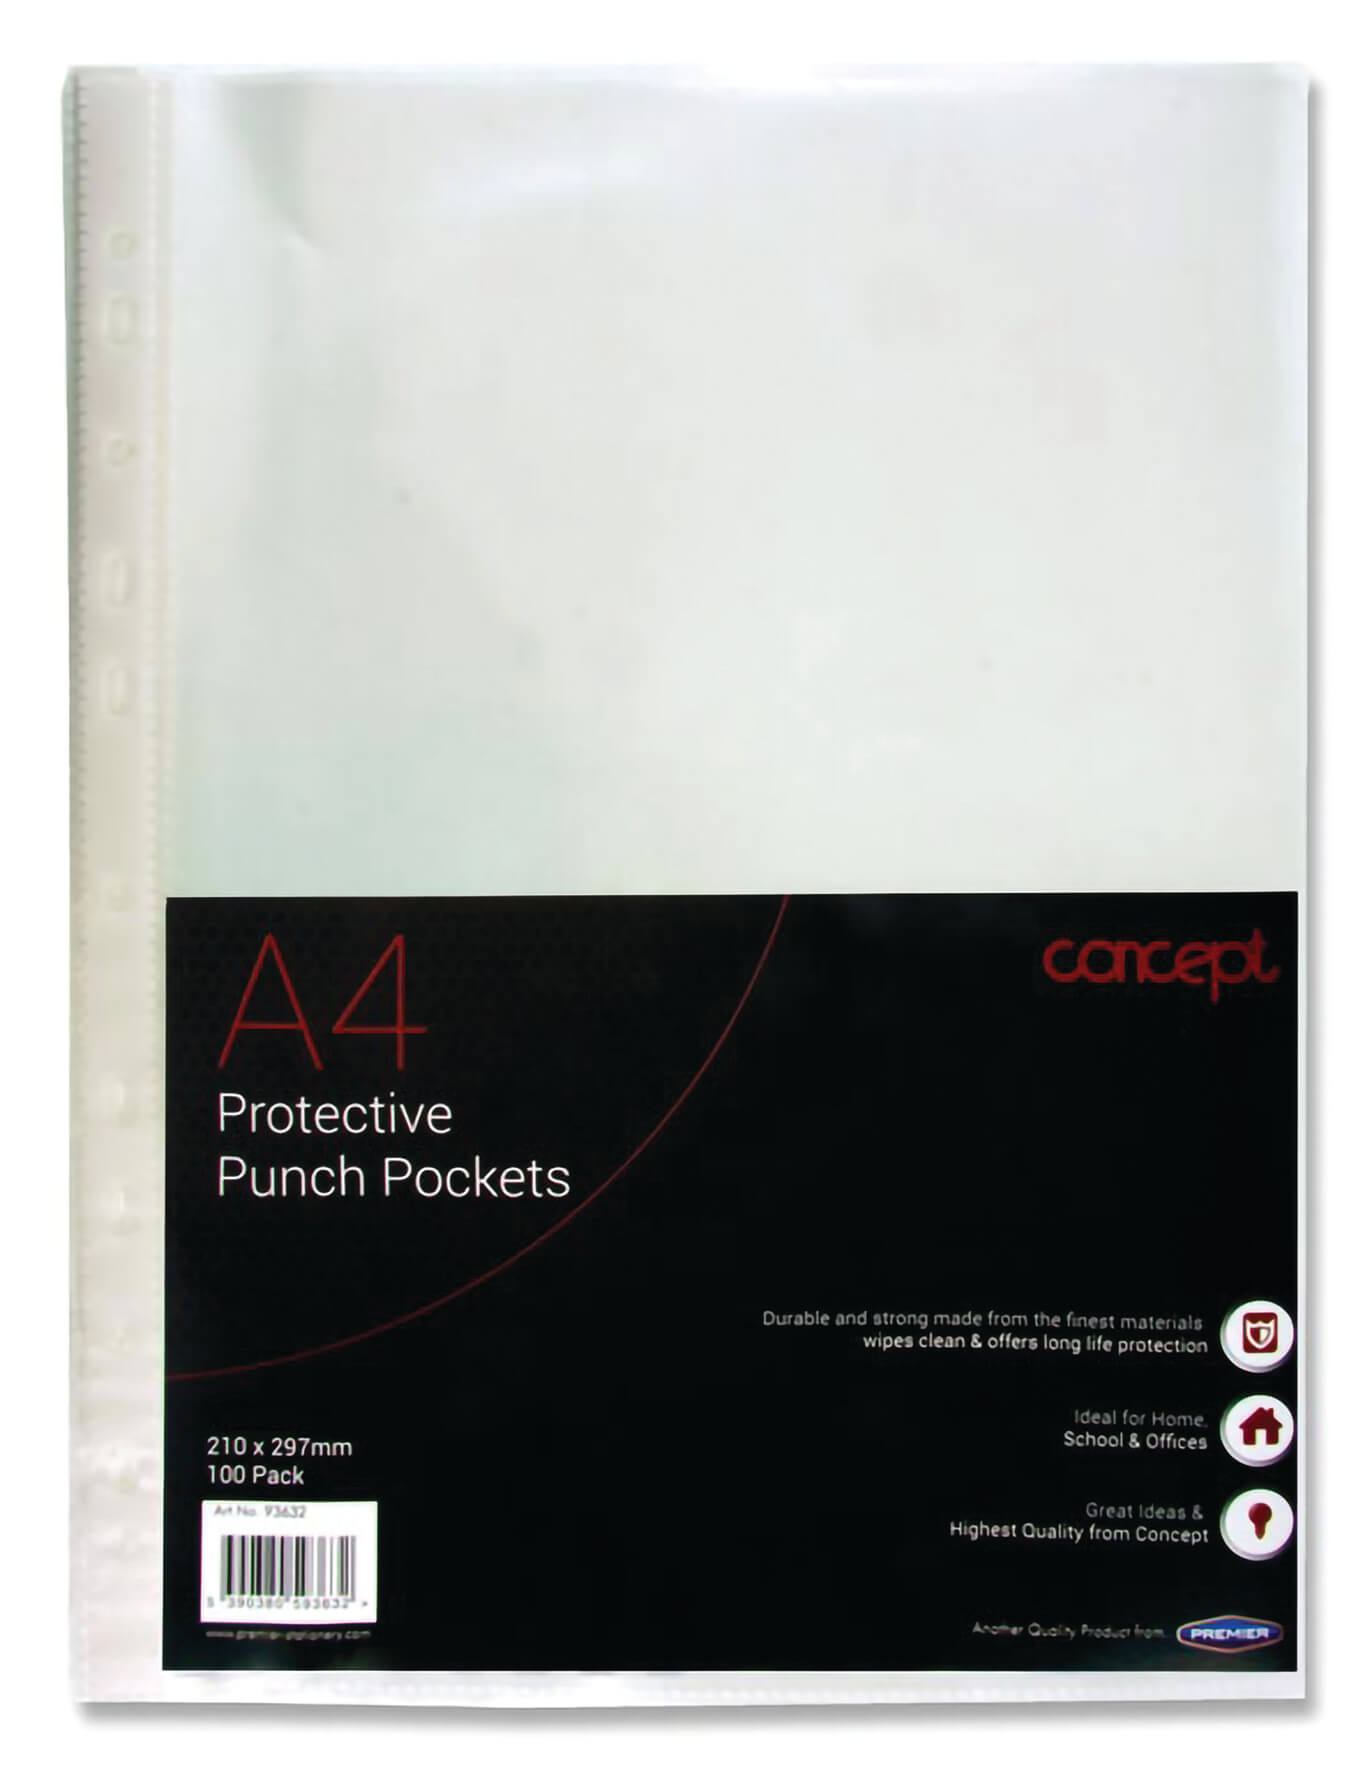 Protective Punched Pockets A4 - Pack of 100